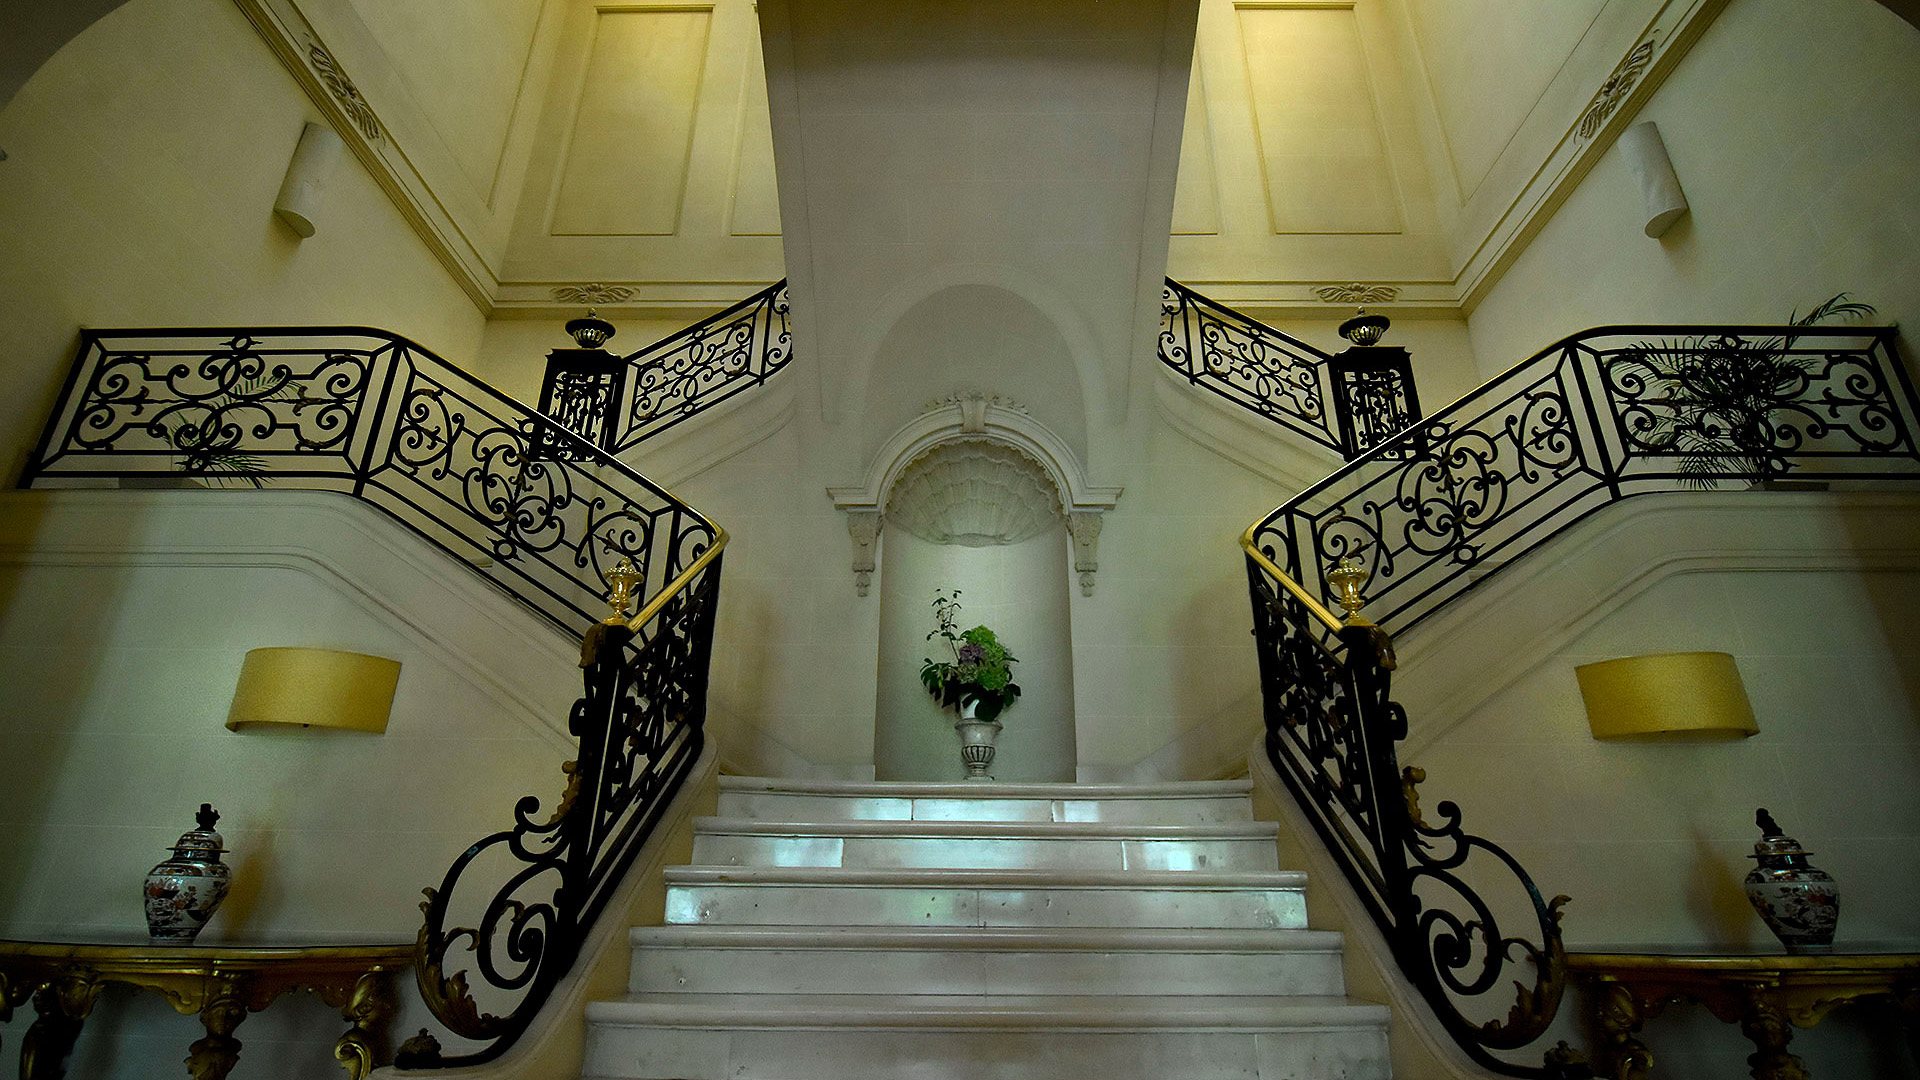 Upon entering, a majestic white marble staircase prevails in sight that, in two directions, leads to the upper floor, where the rooms are located (Nicolás Stulberg)